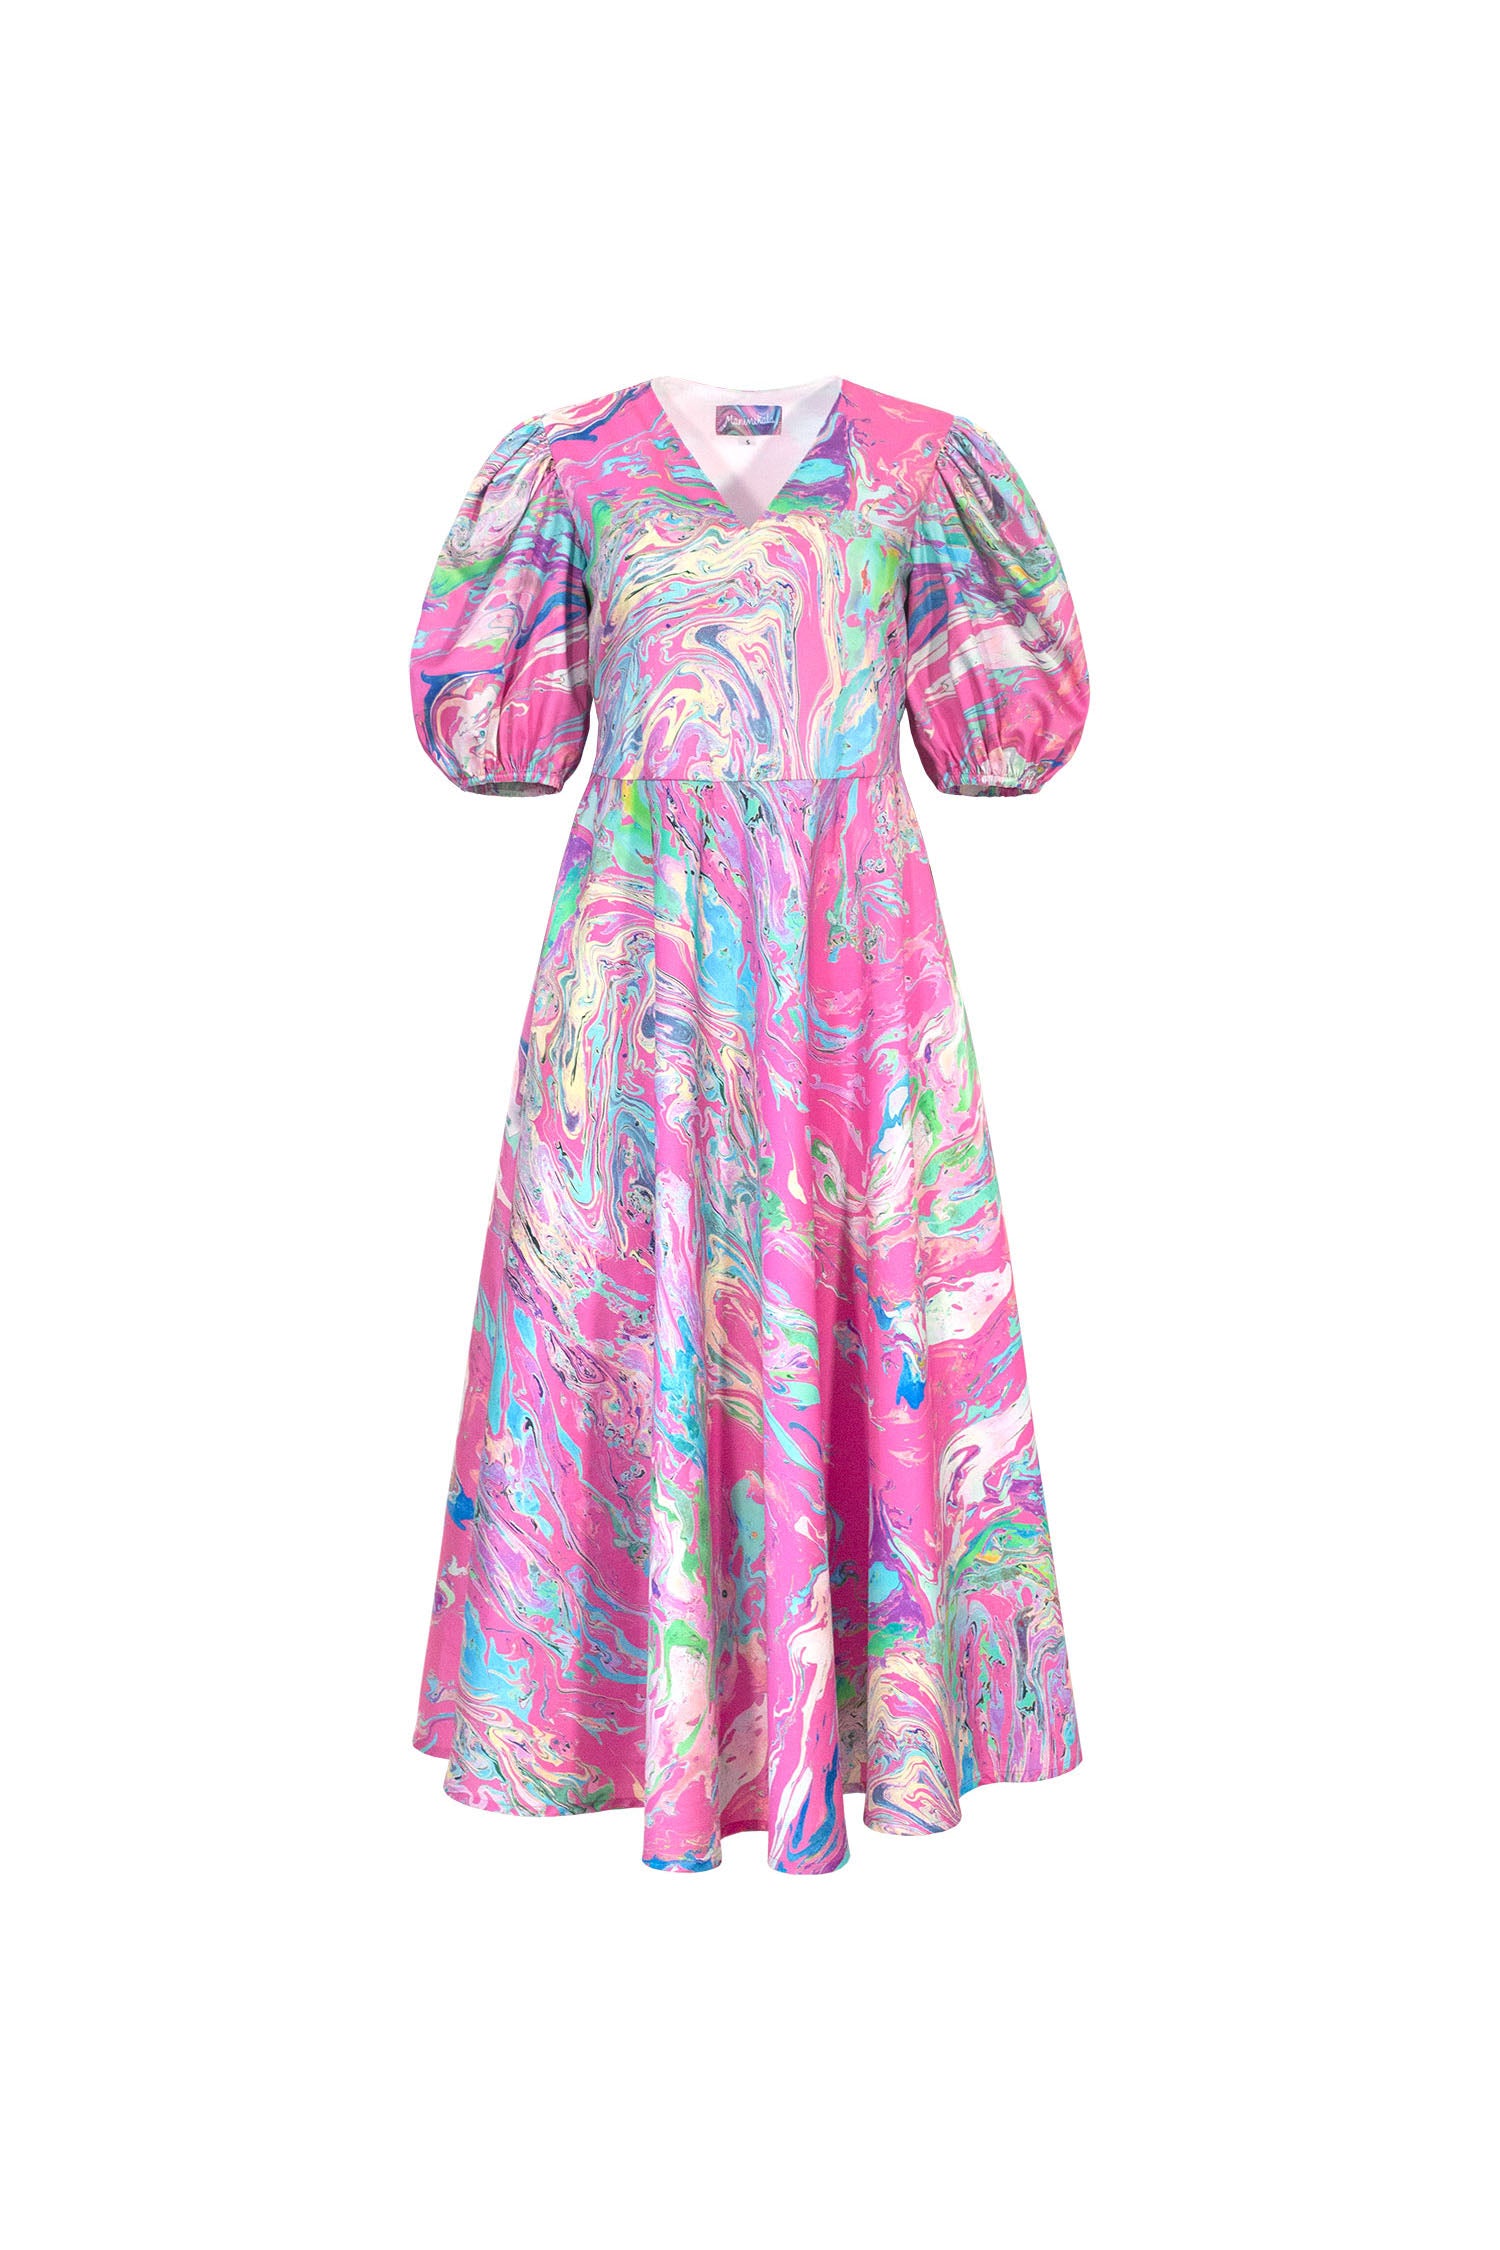 Khushi dress - candy marble